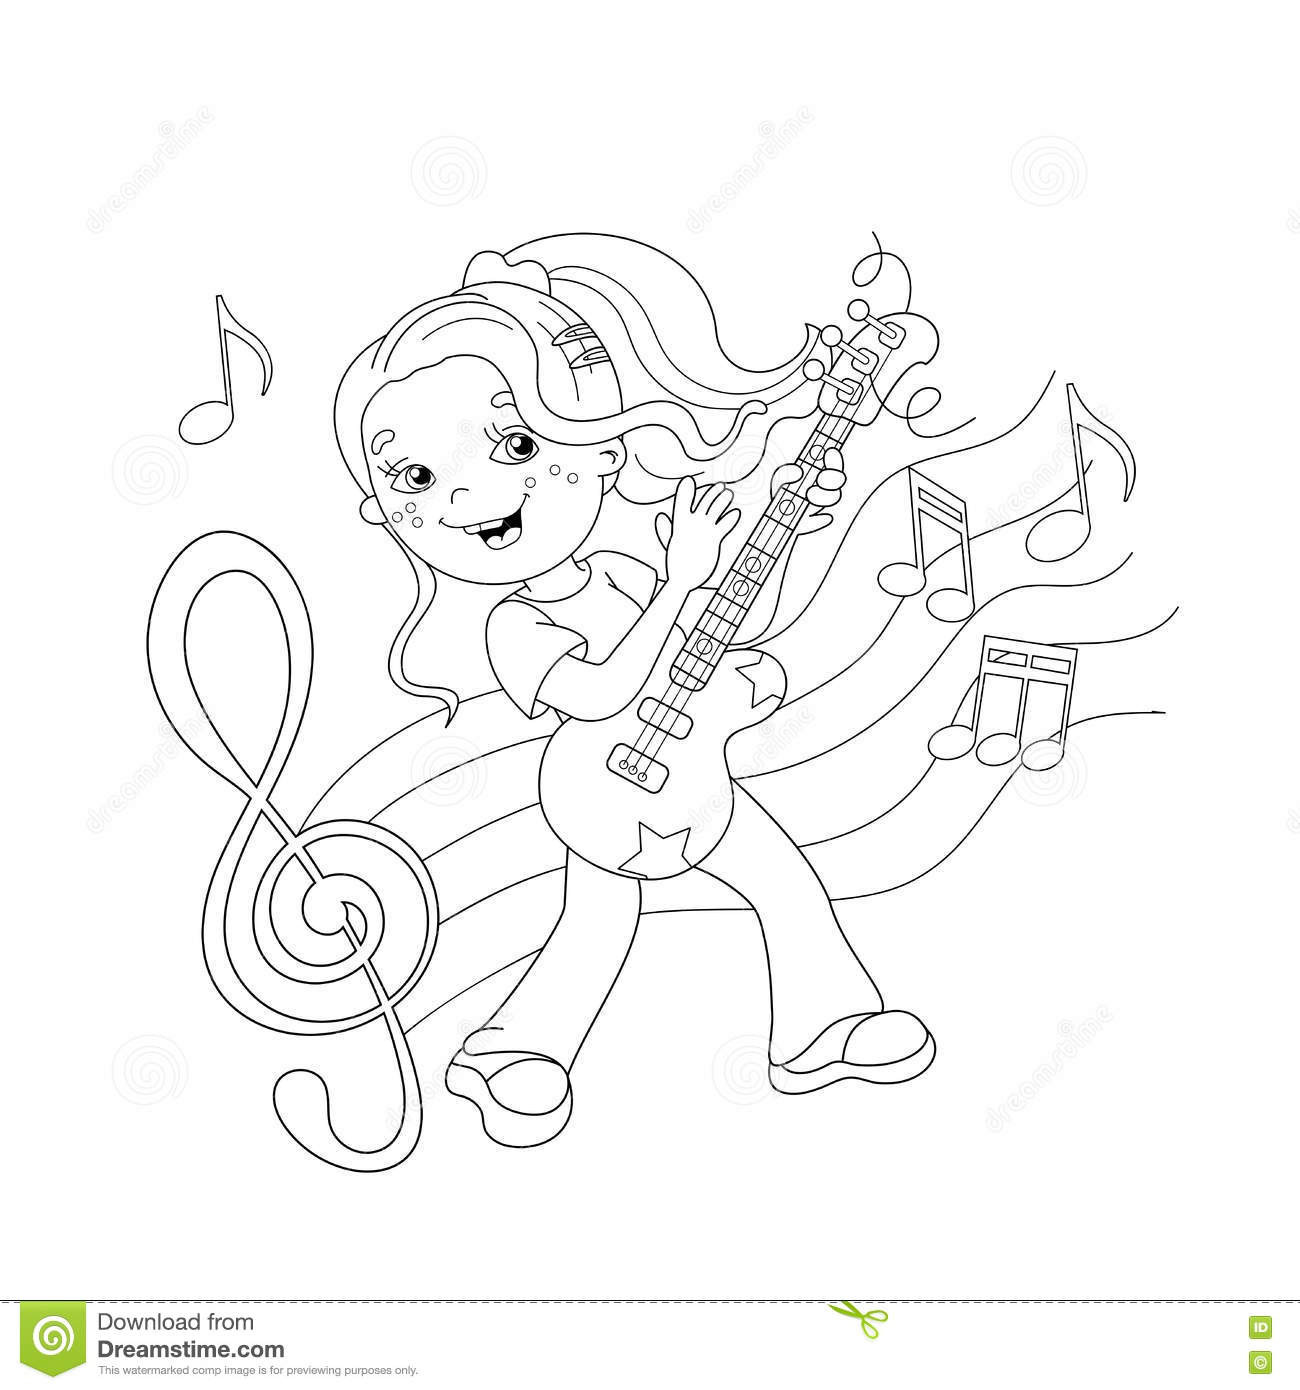 Music Coloring Pages For Kids
 Coloring Page Outline Girl Playing The Guitar Stock